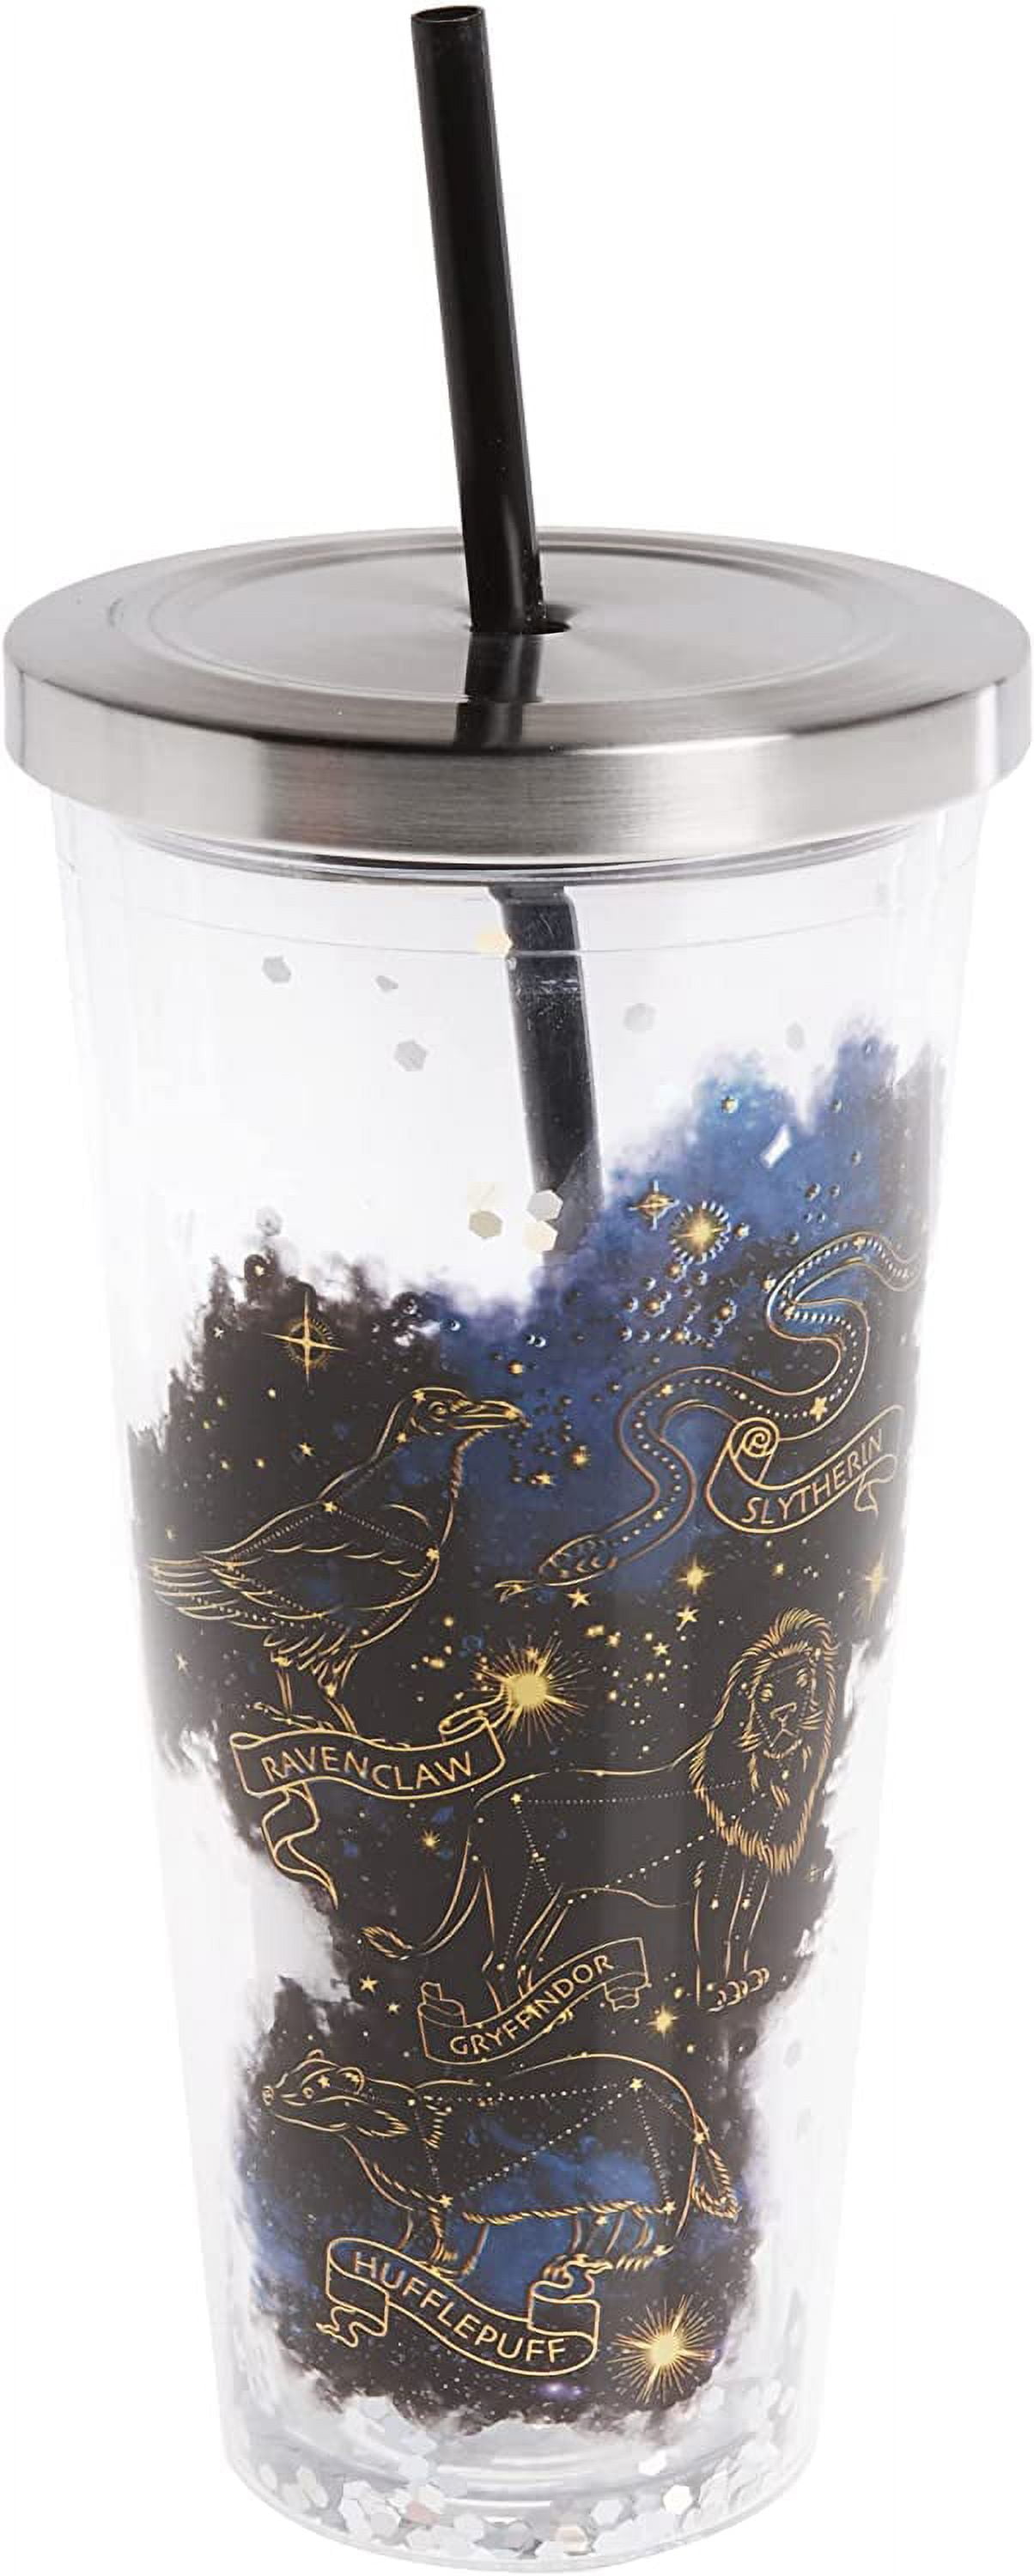 Harry Potter - Platform 9-3/4 - 20oz. Glitter Cup with Straw